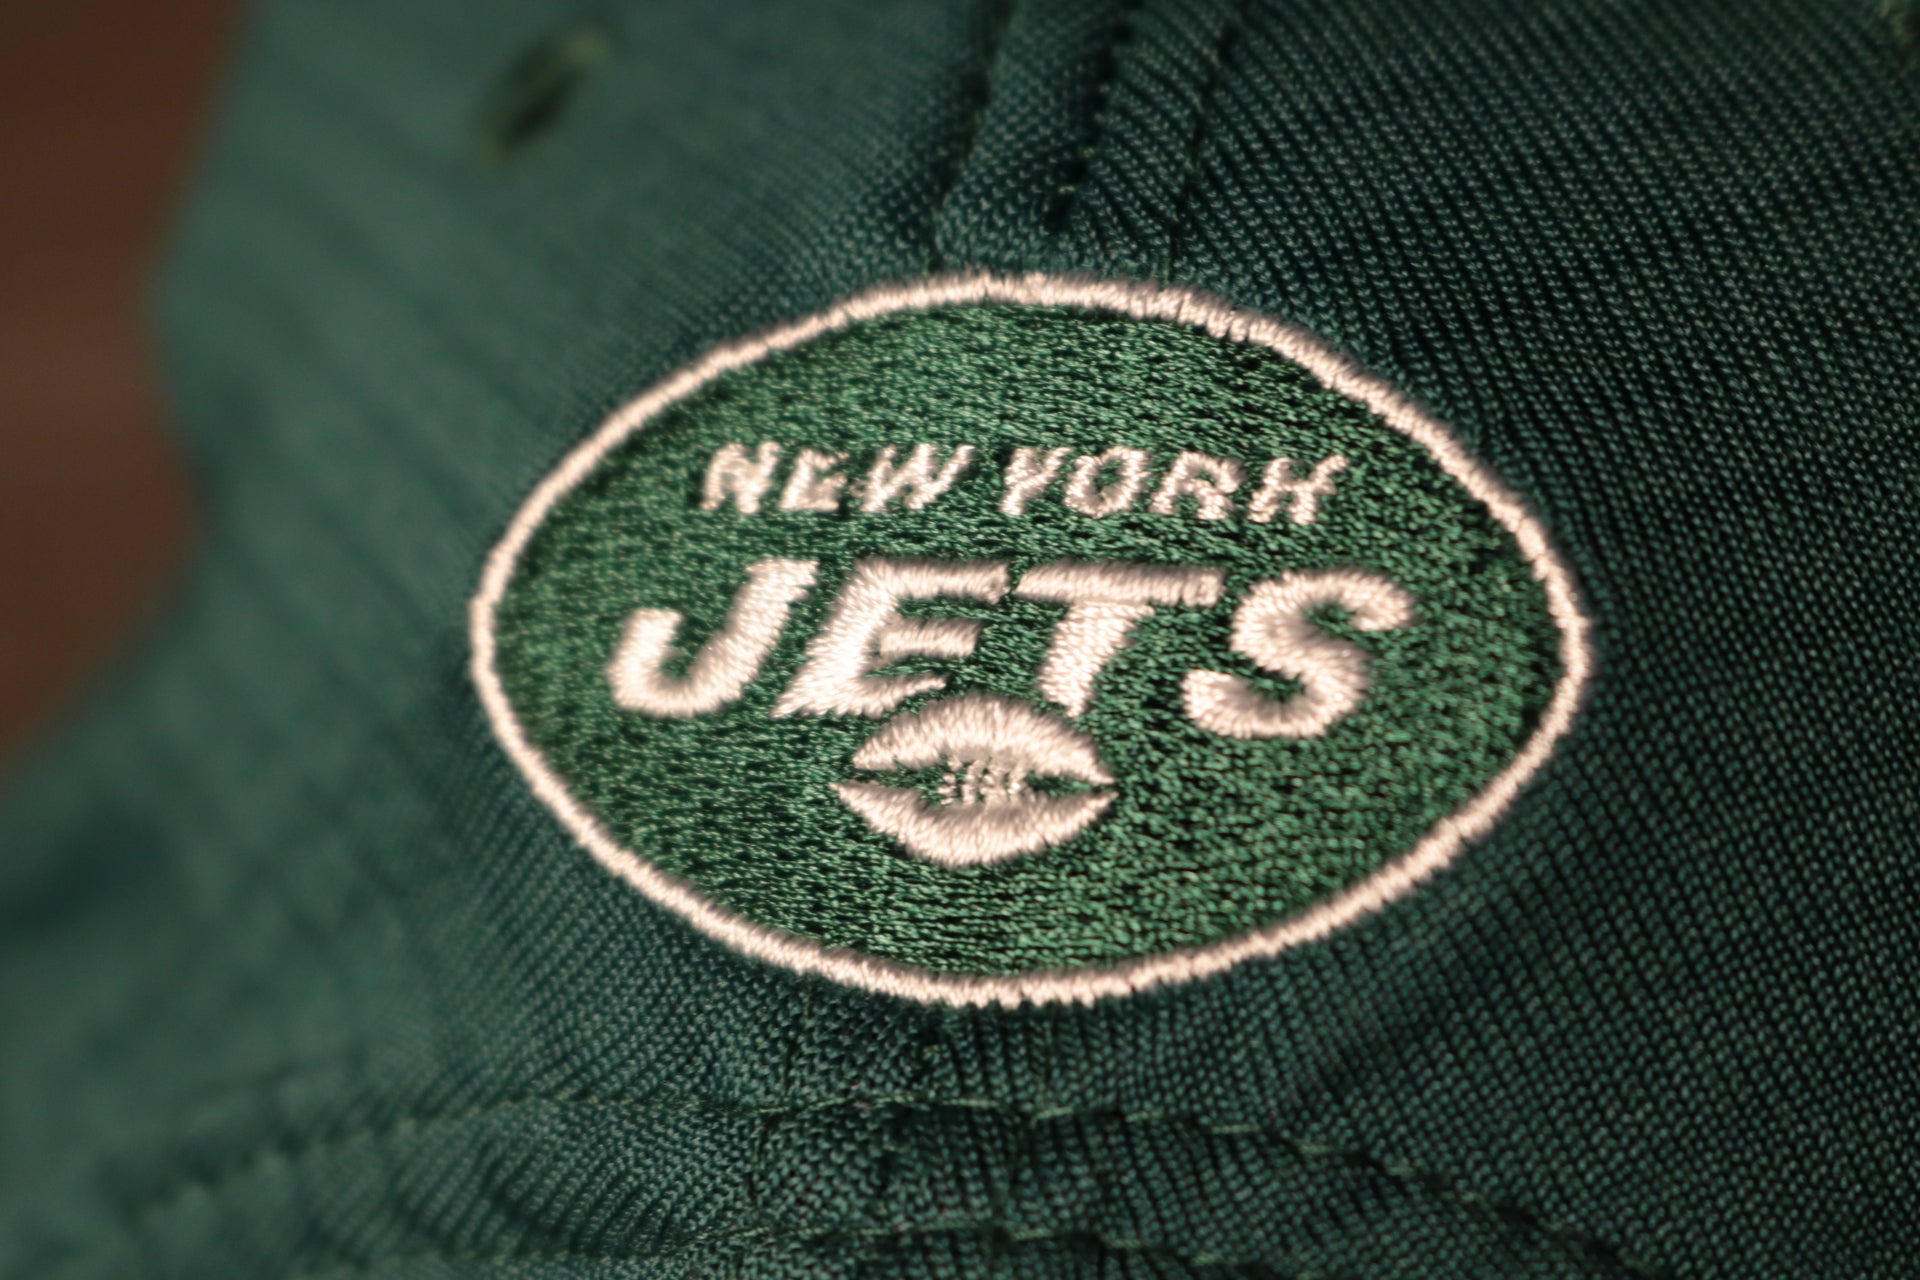 Jets 2020 Training Camp Snapback Hat | New York Jets 2020 On-Field Green Training Camp Snap Cap the Jets logo is on the backside of this jets cap